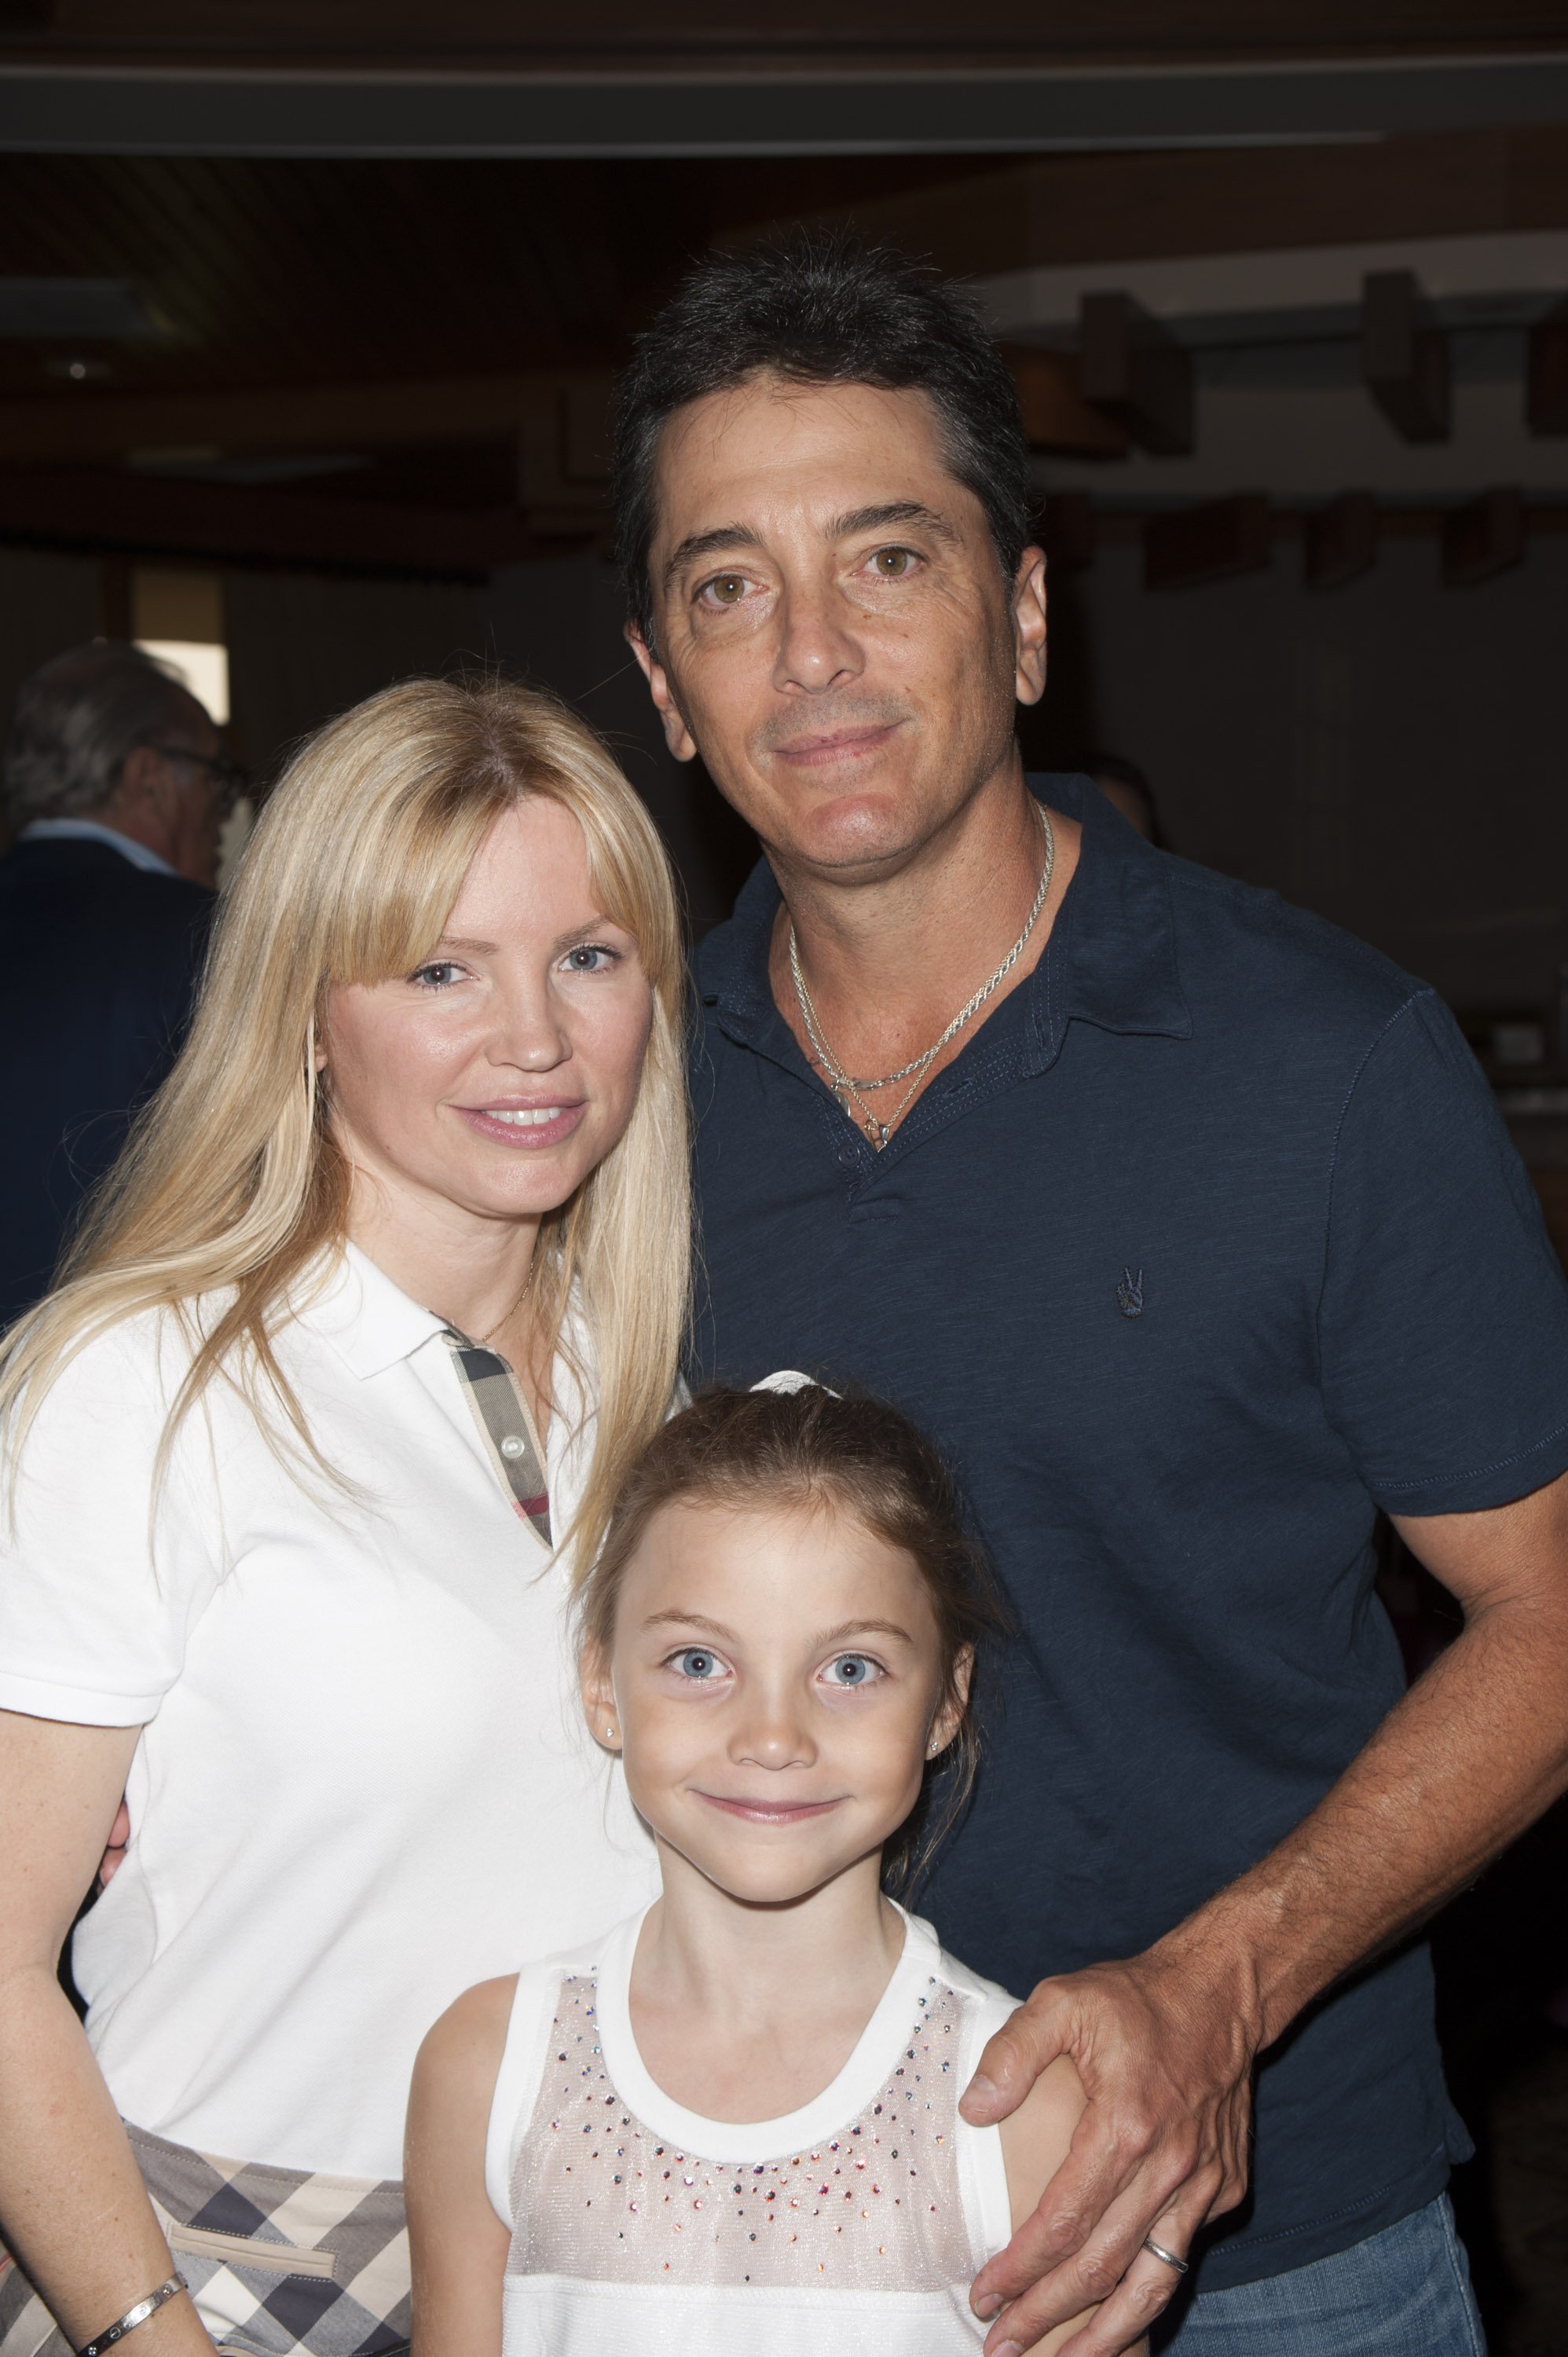 Scott Baio with wife Renee Sloan and daughter Bailey Baio at the Scott Baio 1st Annual Charity Golf Tournament benefiting The Bailey Baio Angel Foundation in 2015, in Woodland Hills, California. | Source: Getty Images